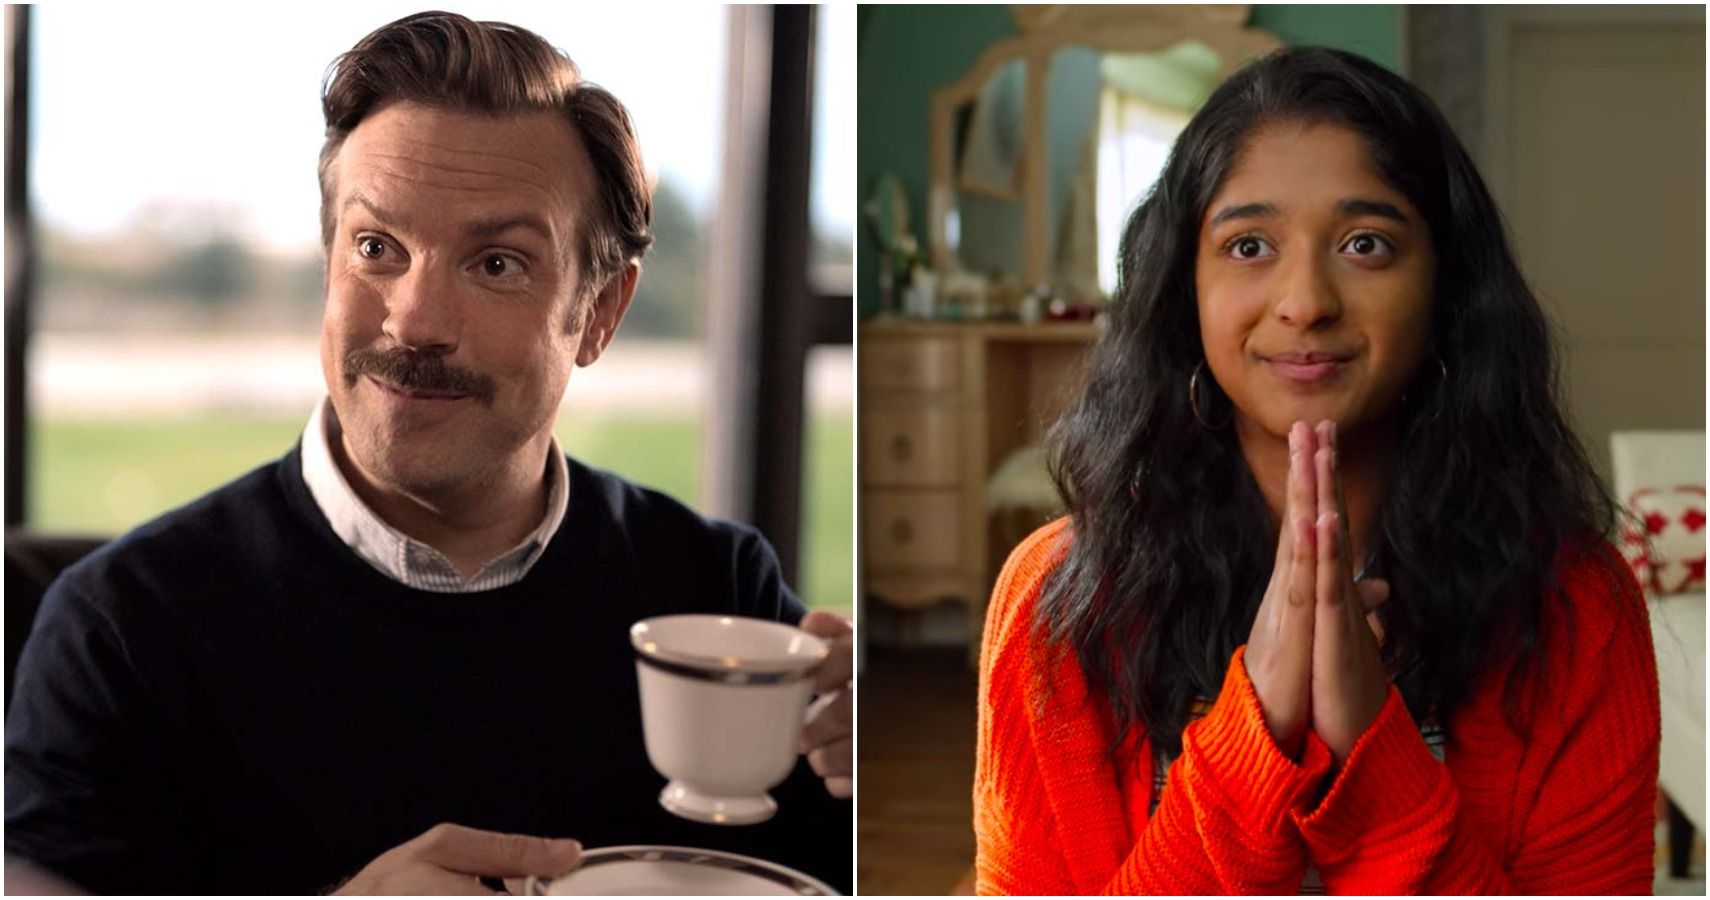 5 Reasons Why Ted Lasso Was The Best New Show Of 2020 (& 5 Why It Was Never Have I Ever)